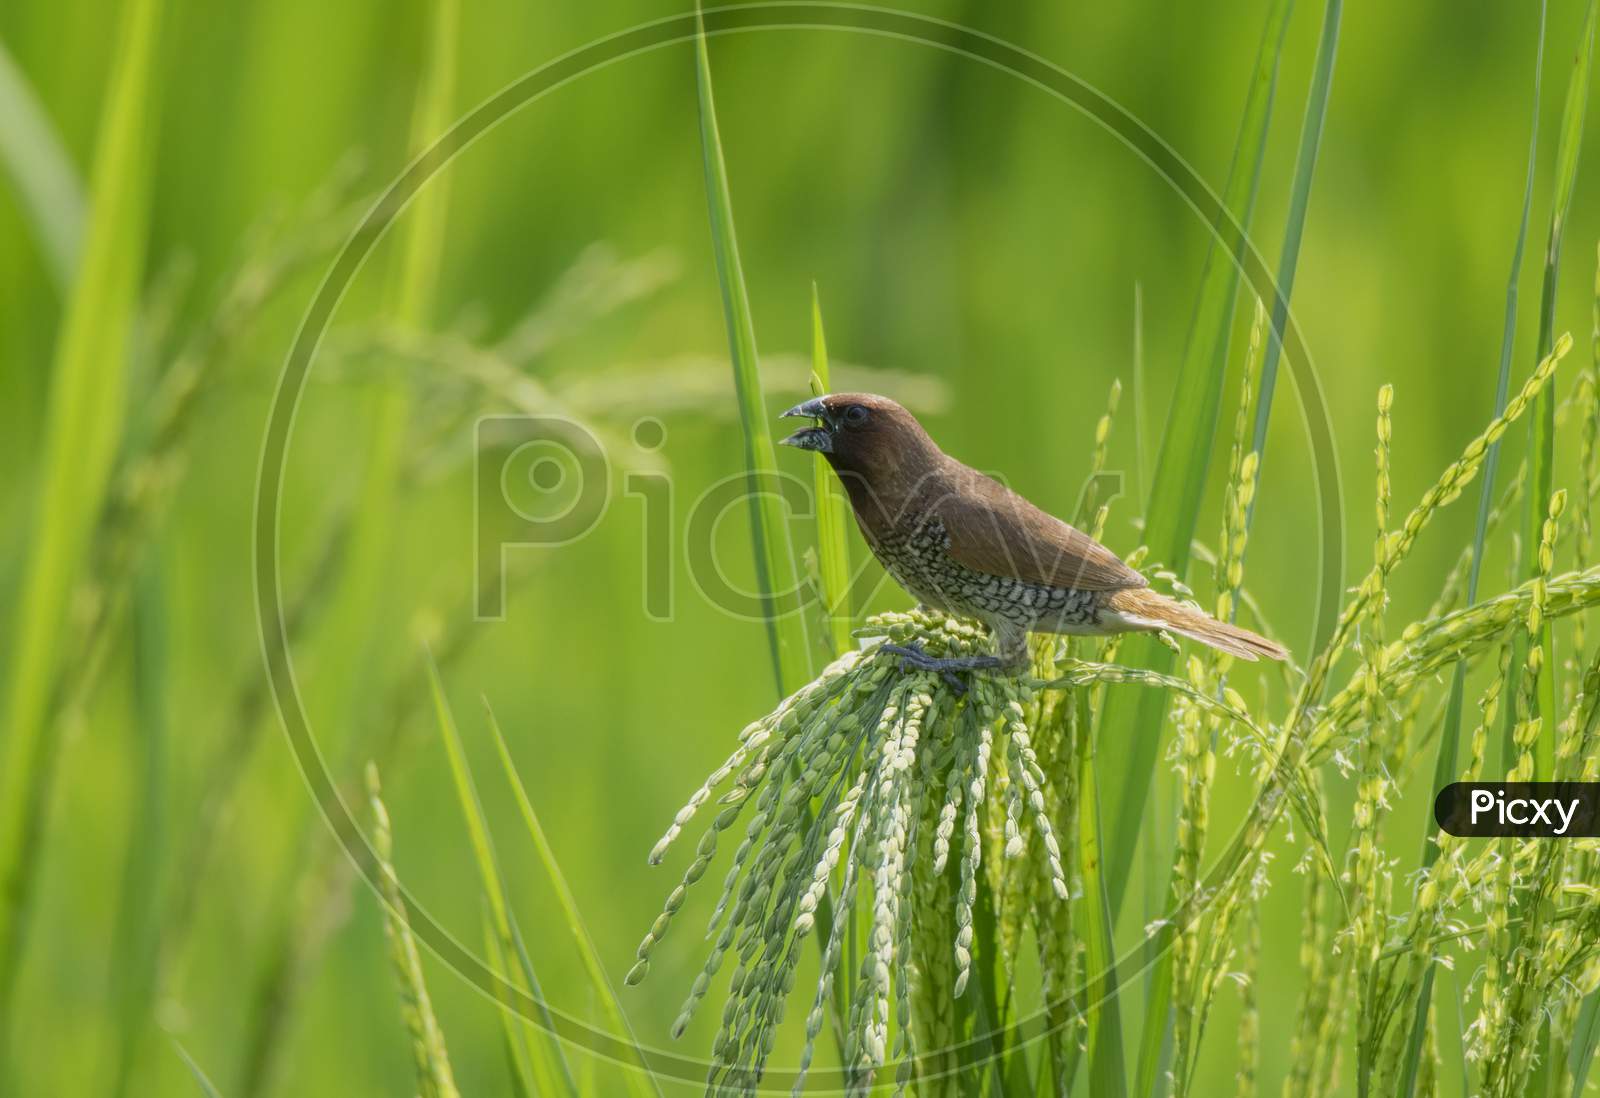 A Small Wild Bird On The The Paddy Tree